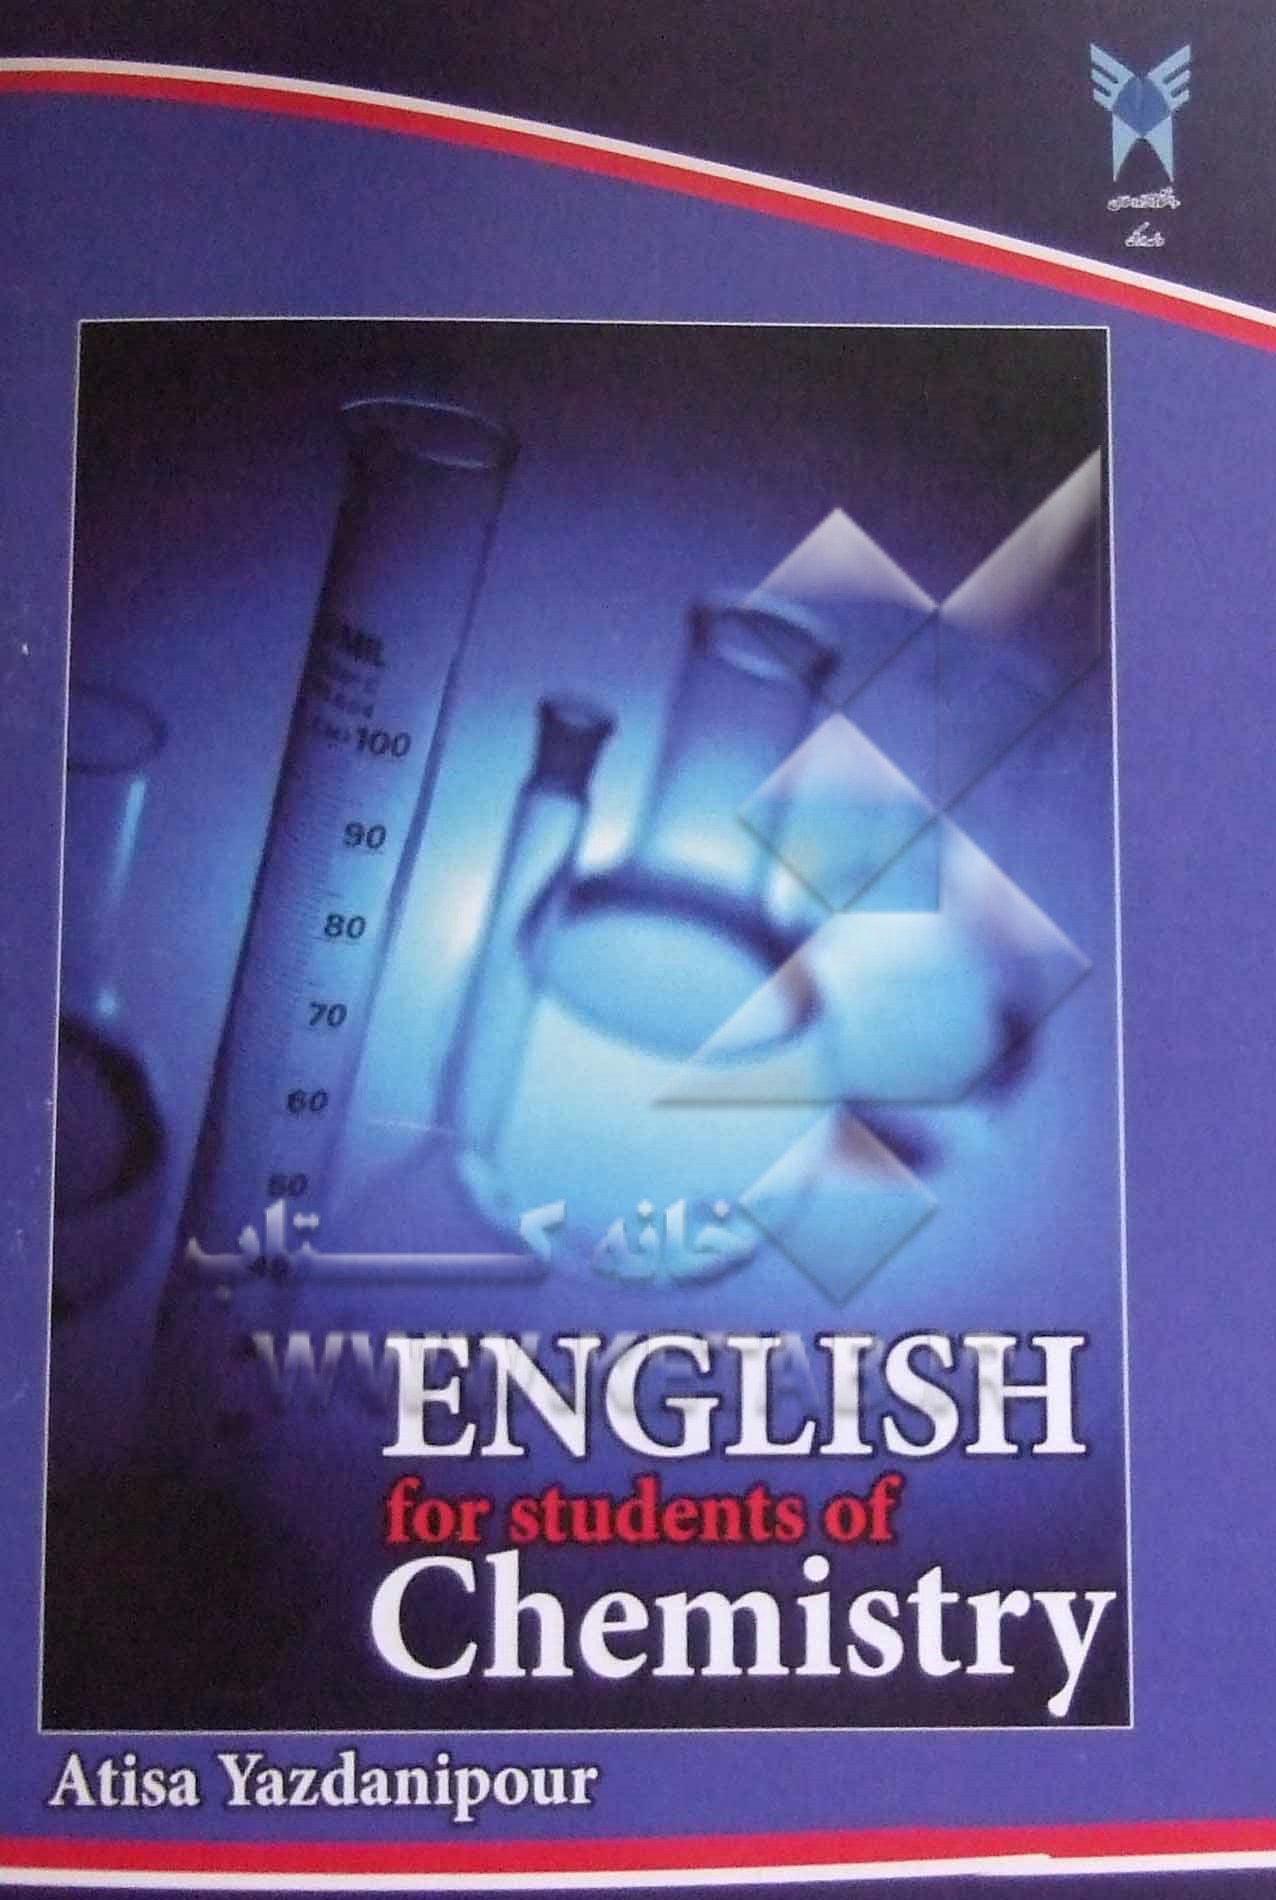 English for students of chemistry